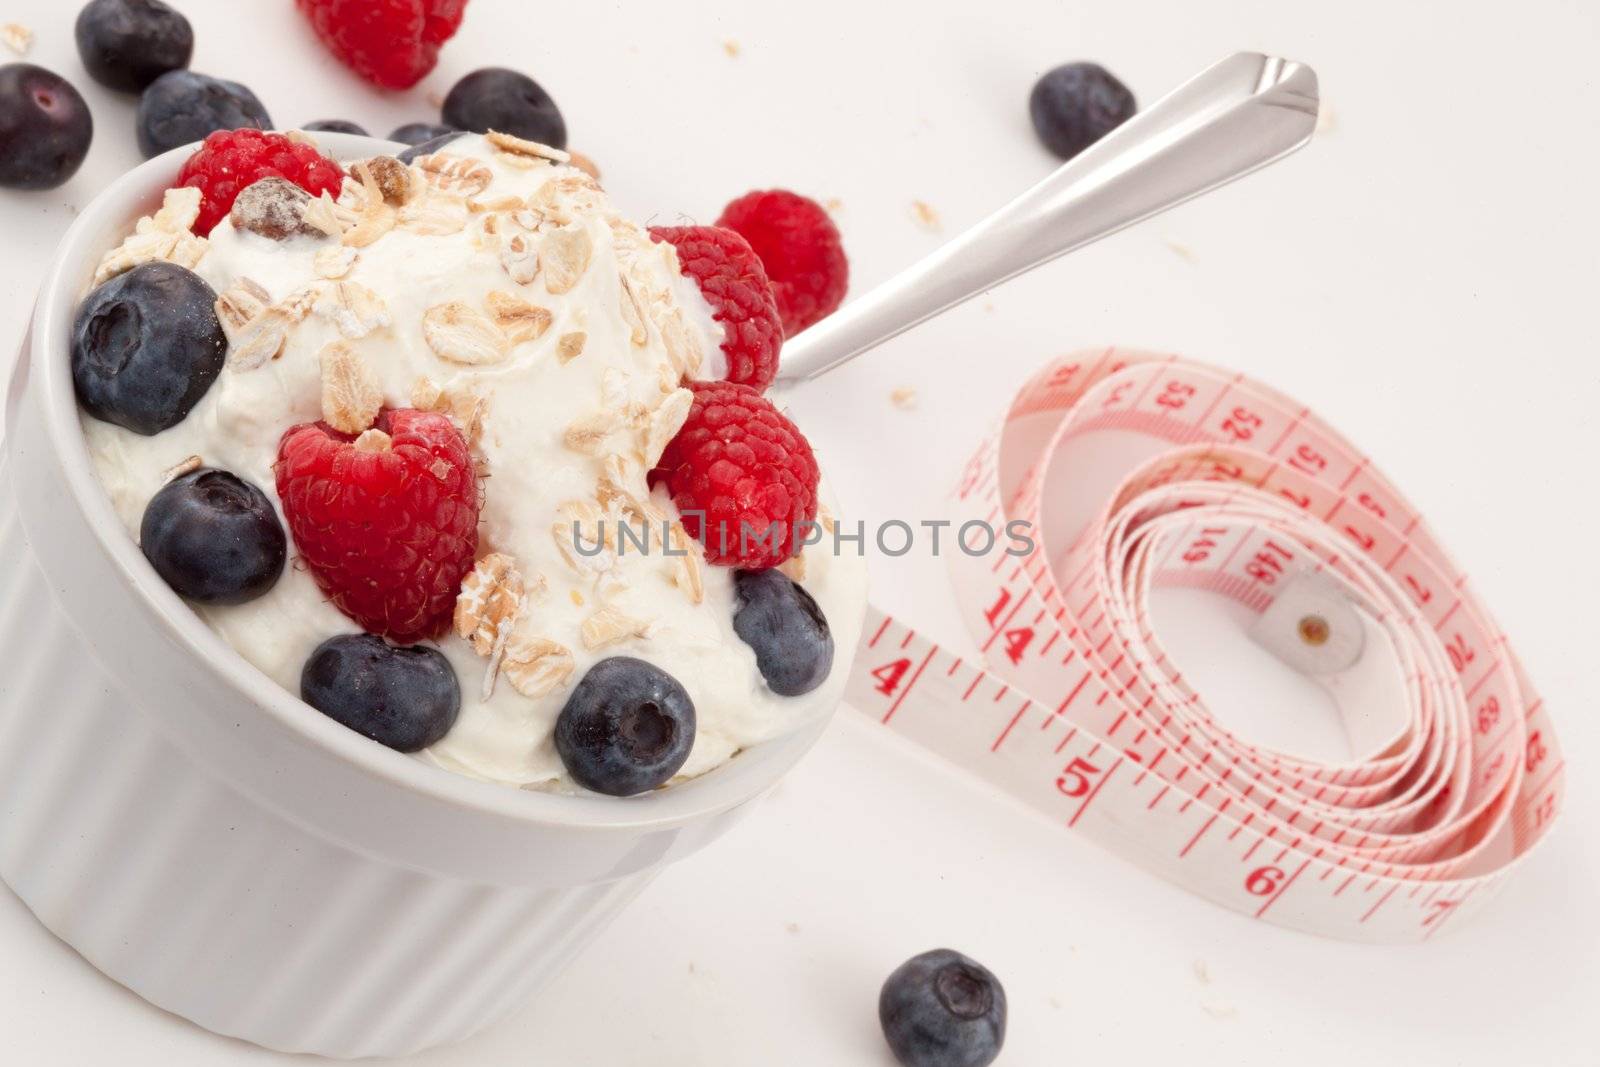 Jar of fruits and whipped cream with spoon and a tape measure against white background